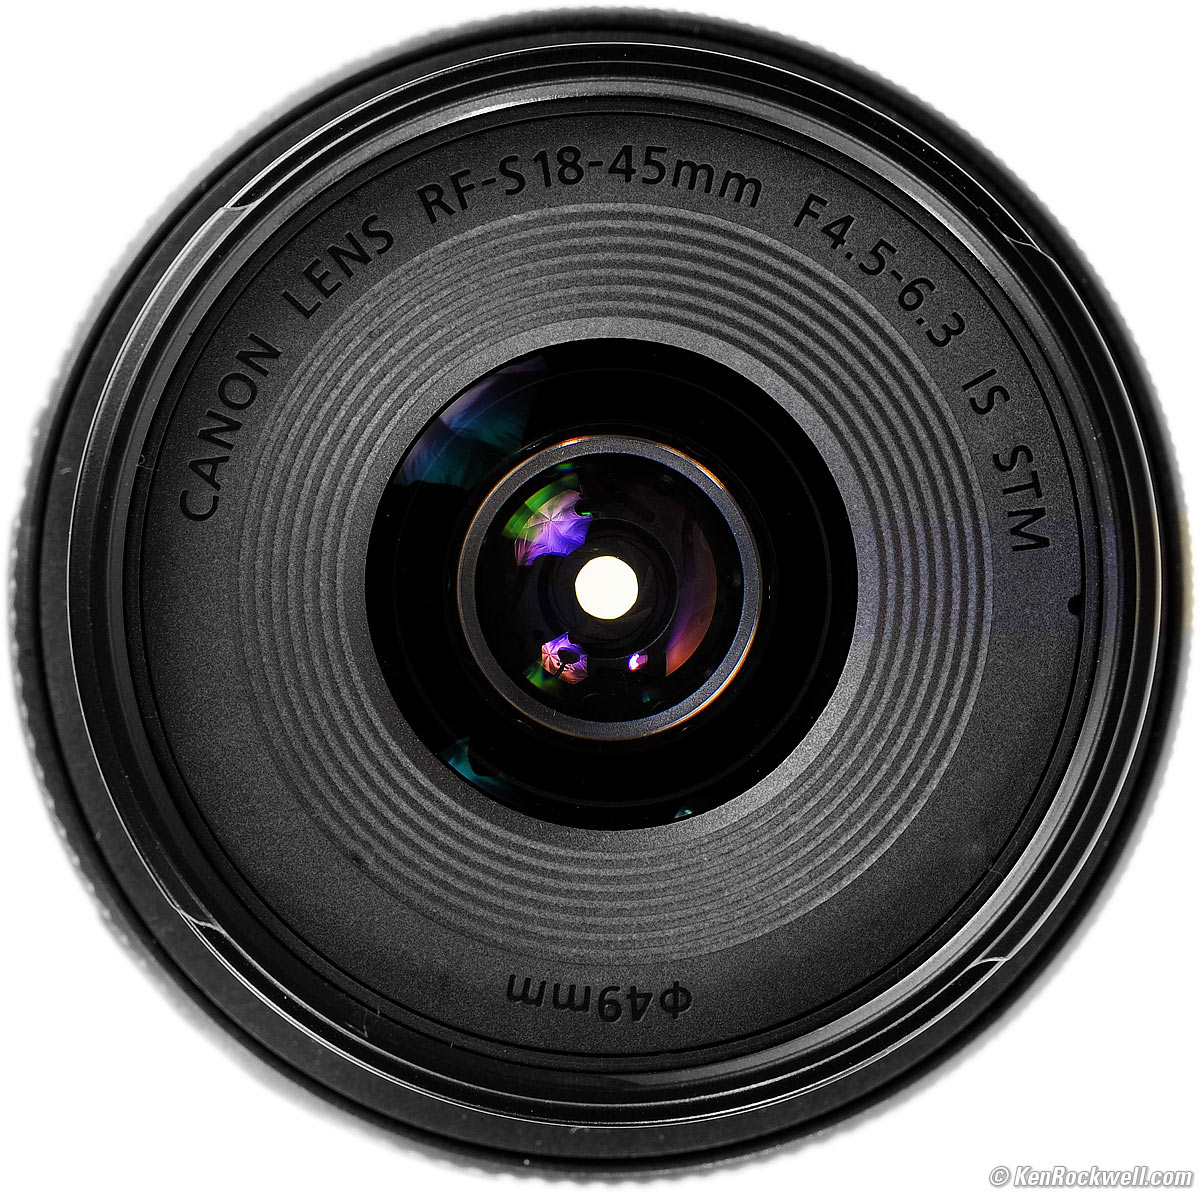 Canon RF-s 18-45mm IS STM Review & Sample Images by Ken Rockwell